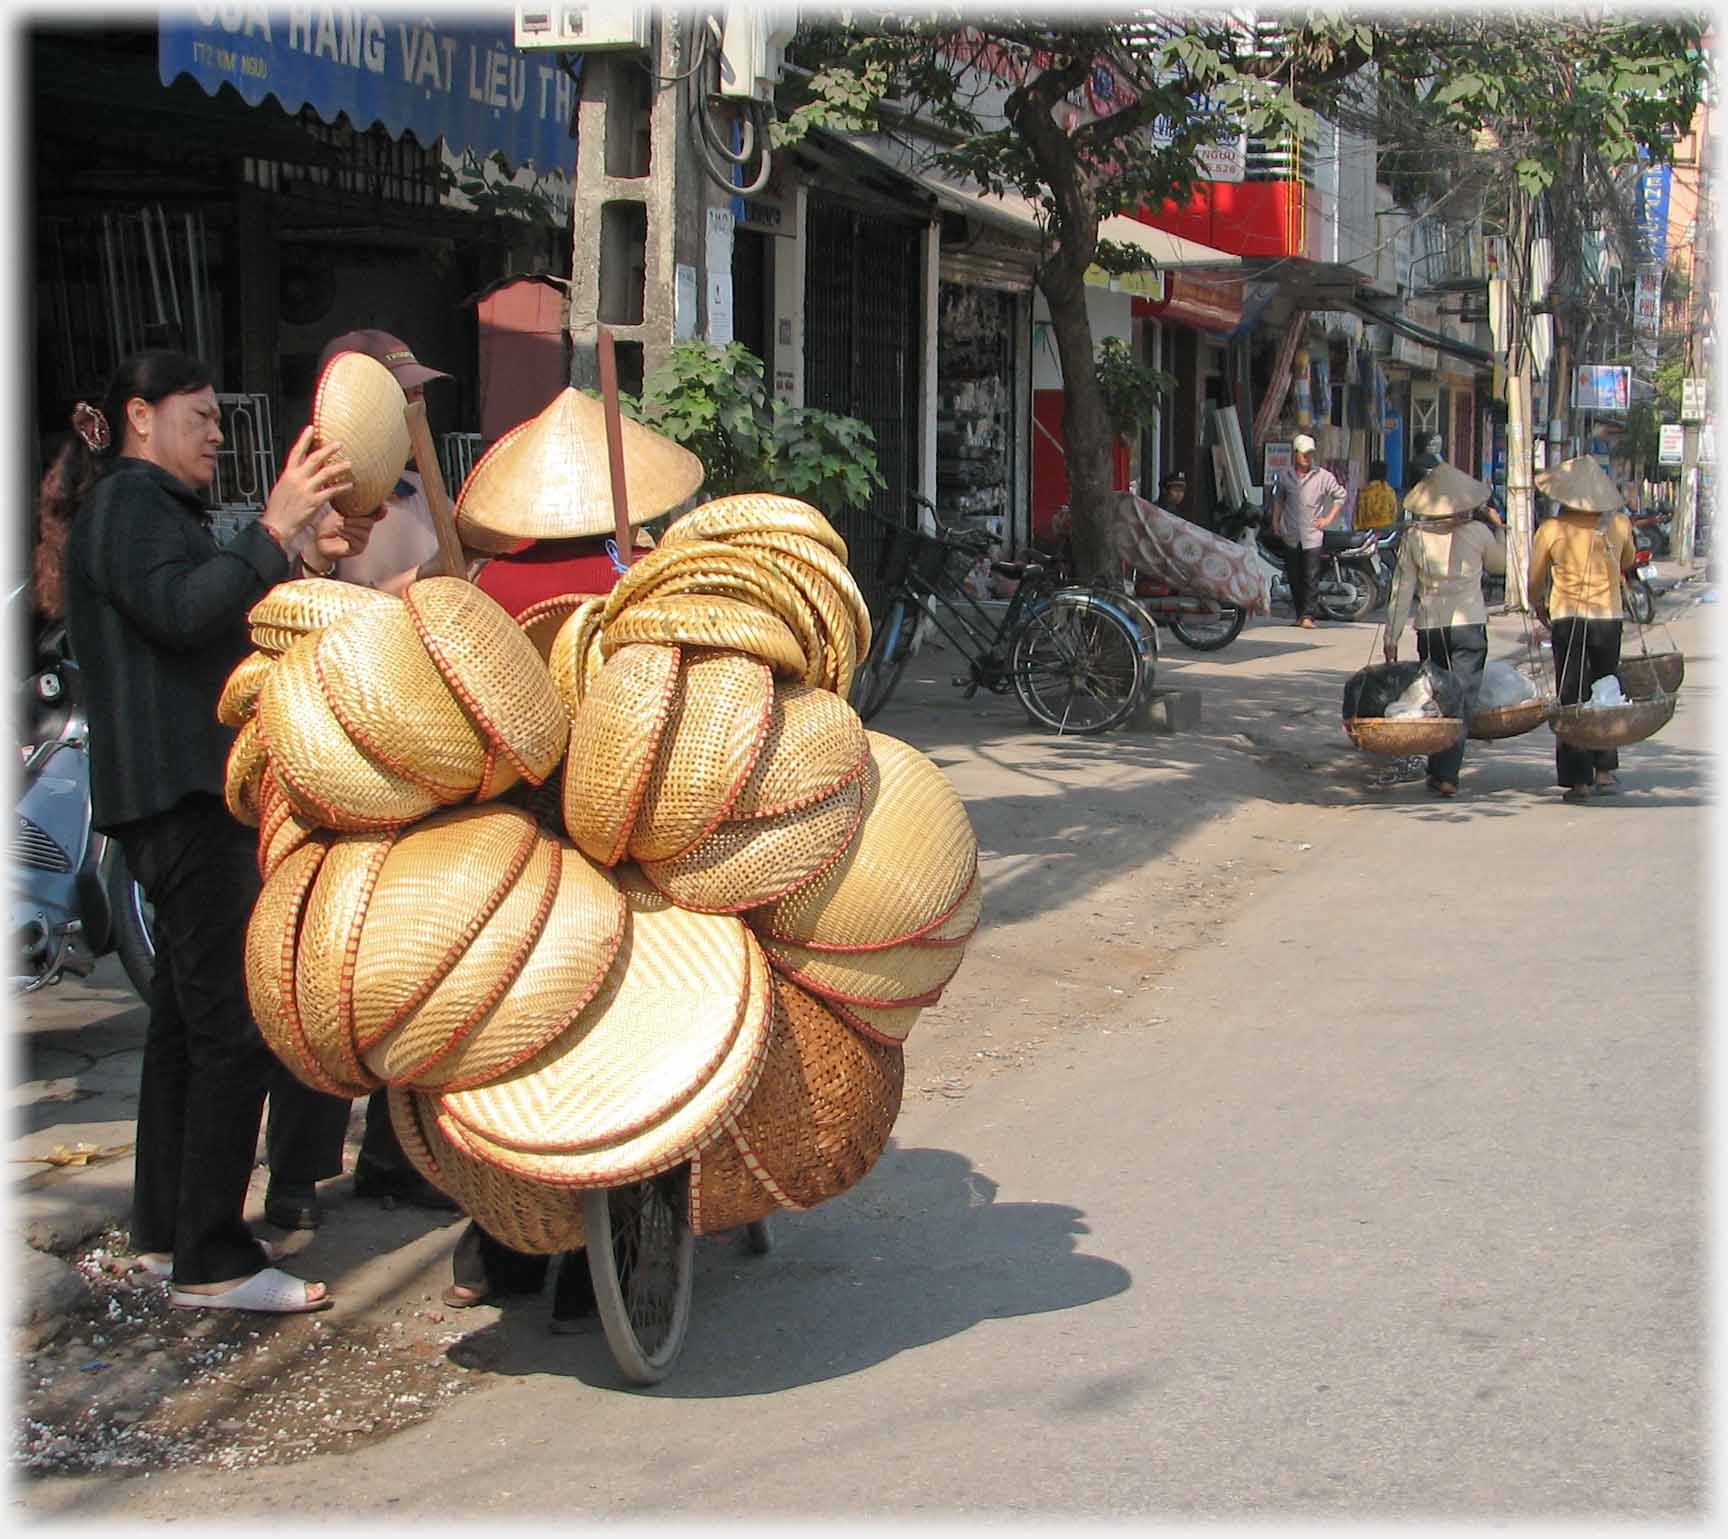 Bicycle loaded with baskets, woman examines one of them, a conical hat on a red shirt peeks above.